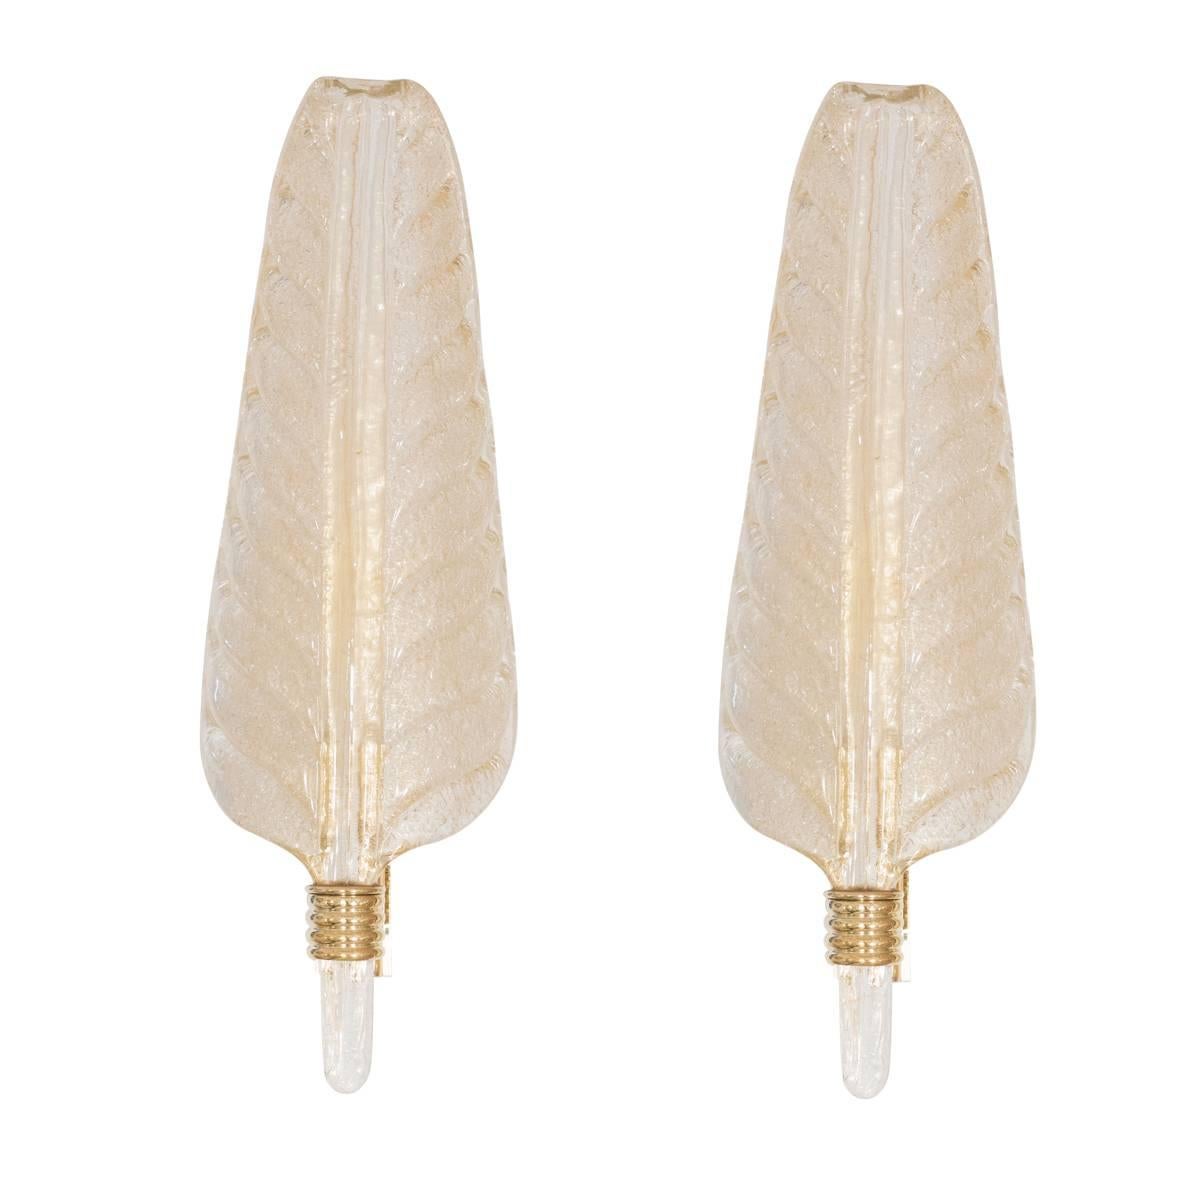 Pair of Golden Murano Glass Leaf Sconces